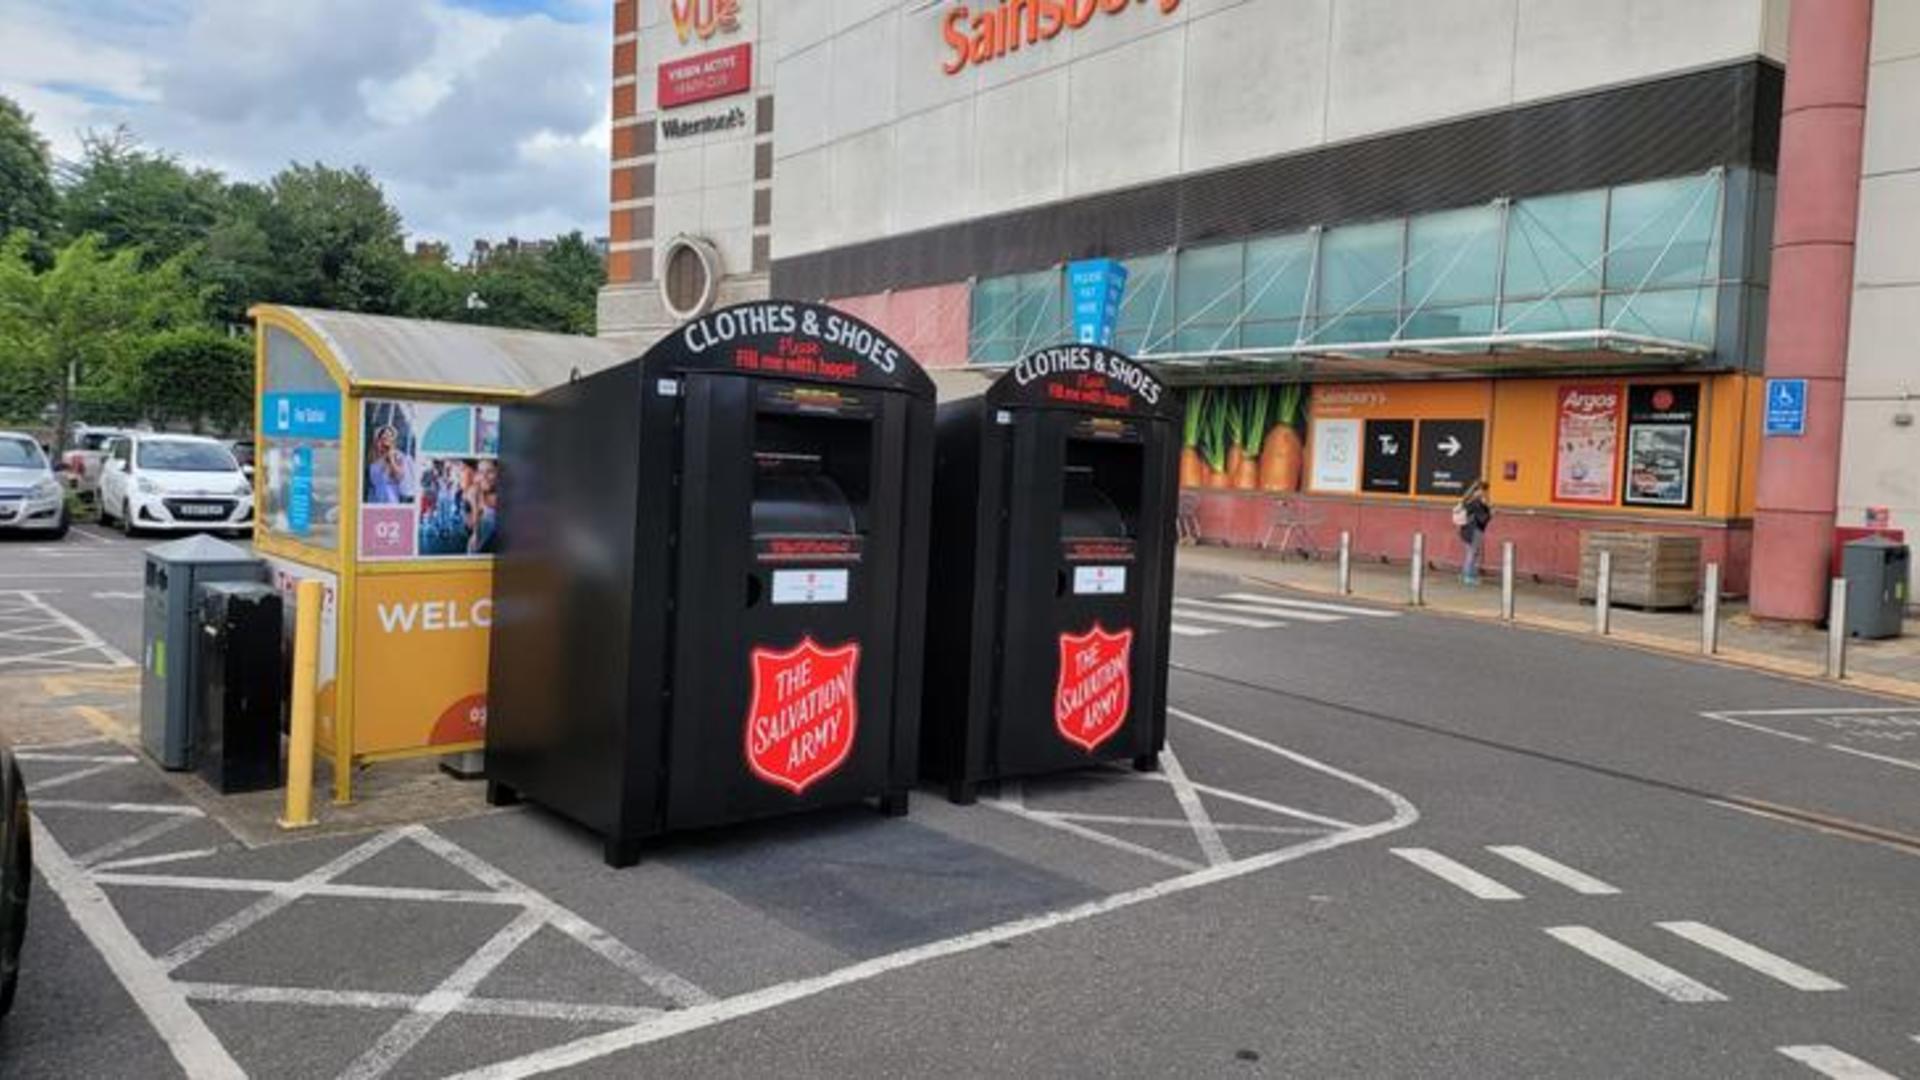 In 2023 we launched a partnership with The Salvation Army, bringing new clothing donation banks to three of our retail destinations